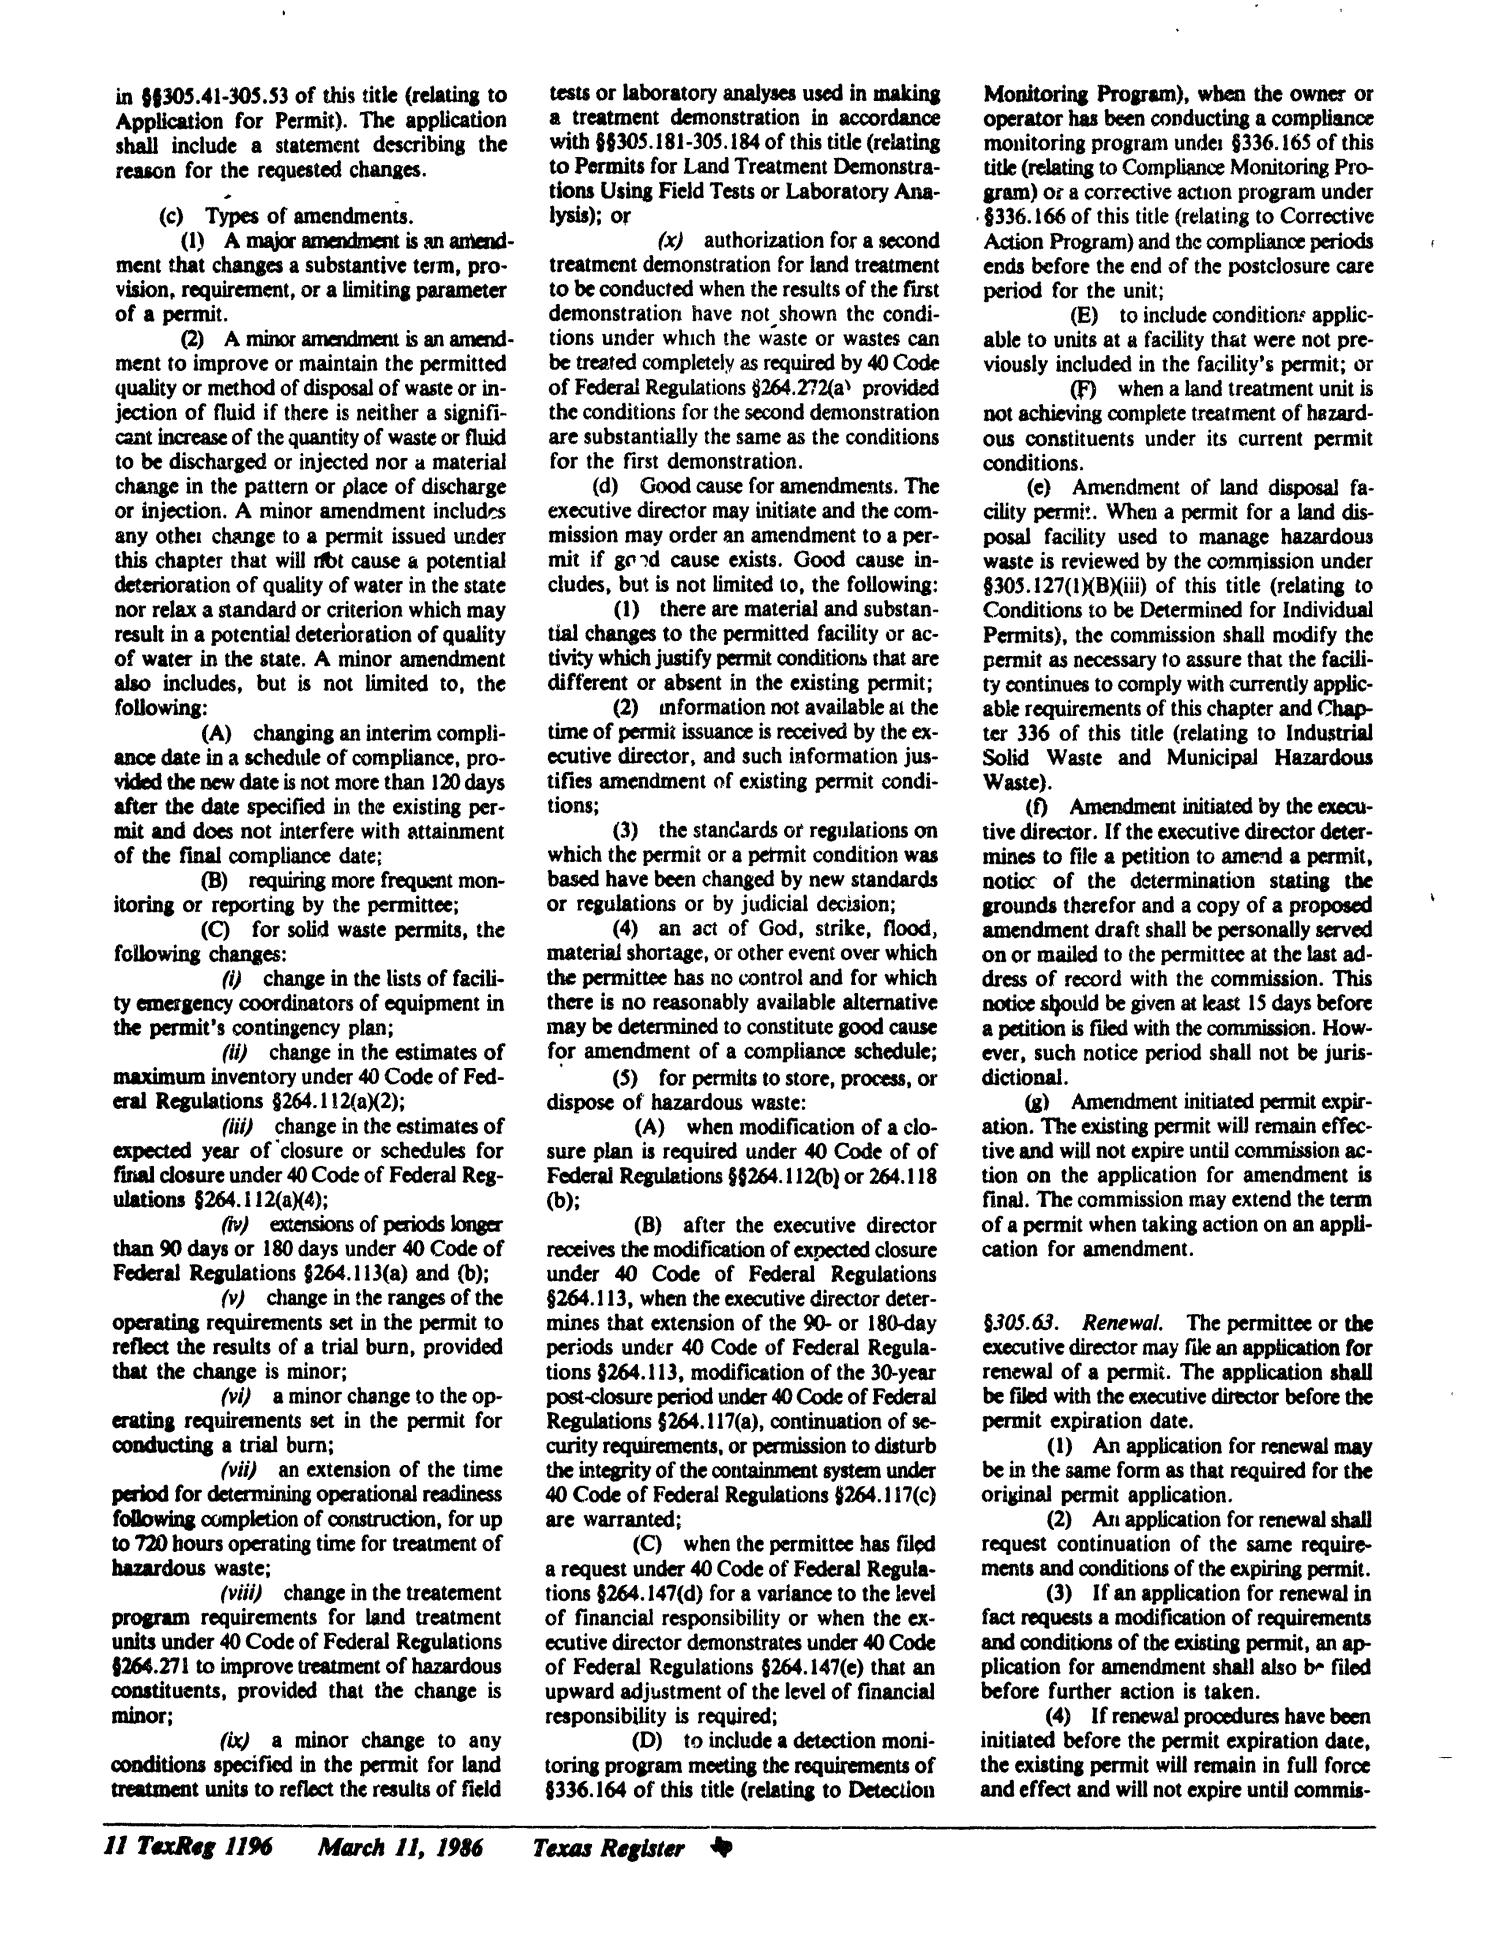 Texas Register, Volume 11, Number 19, Pages 1163-1244, March 11, 1986
                                                
                                                    1196
                                                